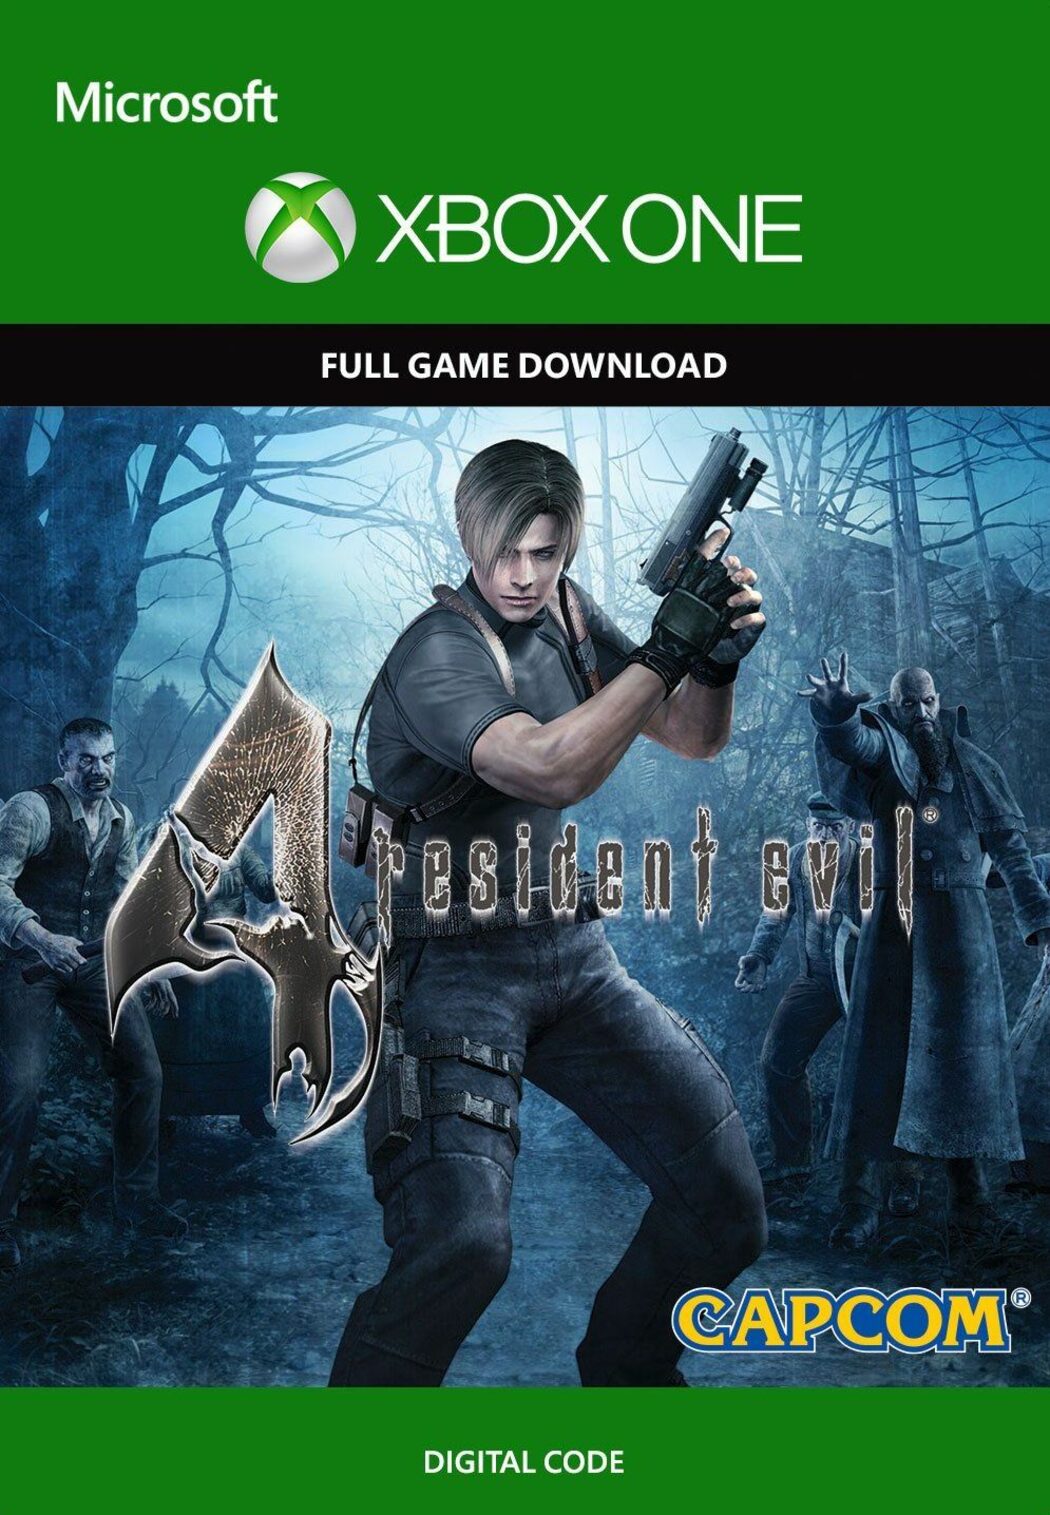 Buy Resident Evil 4 Remake  Deluxe Edition (Xbox Series X/S) - Xbox Live  Key - ARGENTINA - Cheap - !